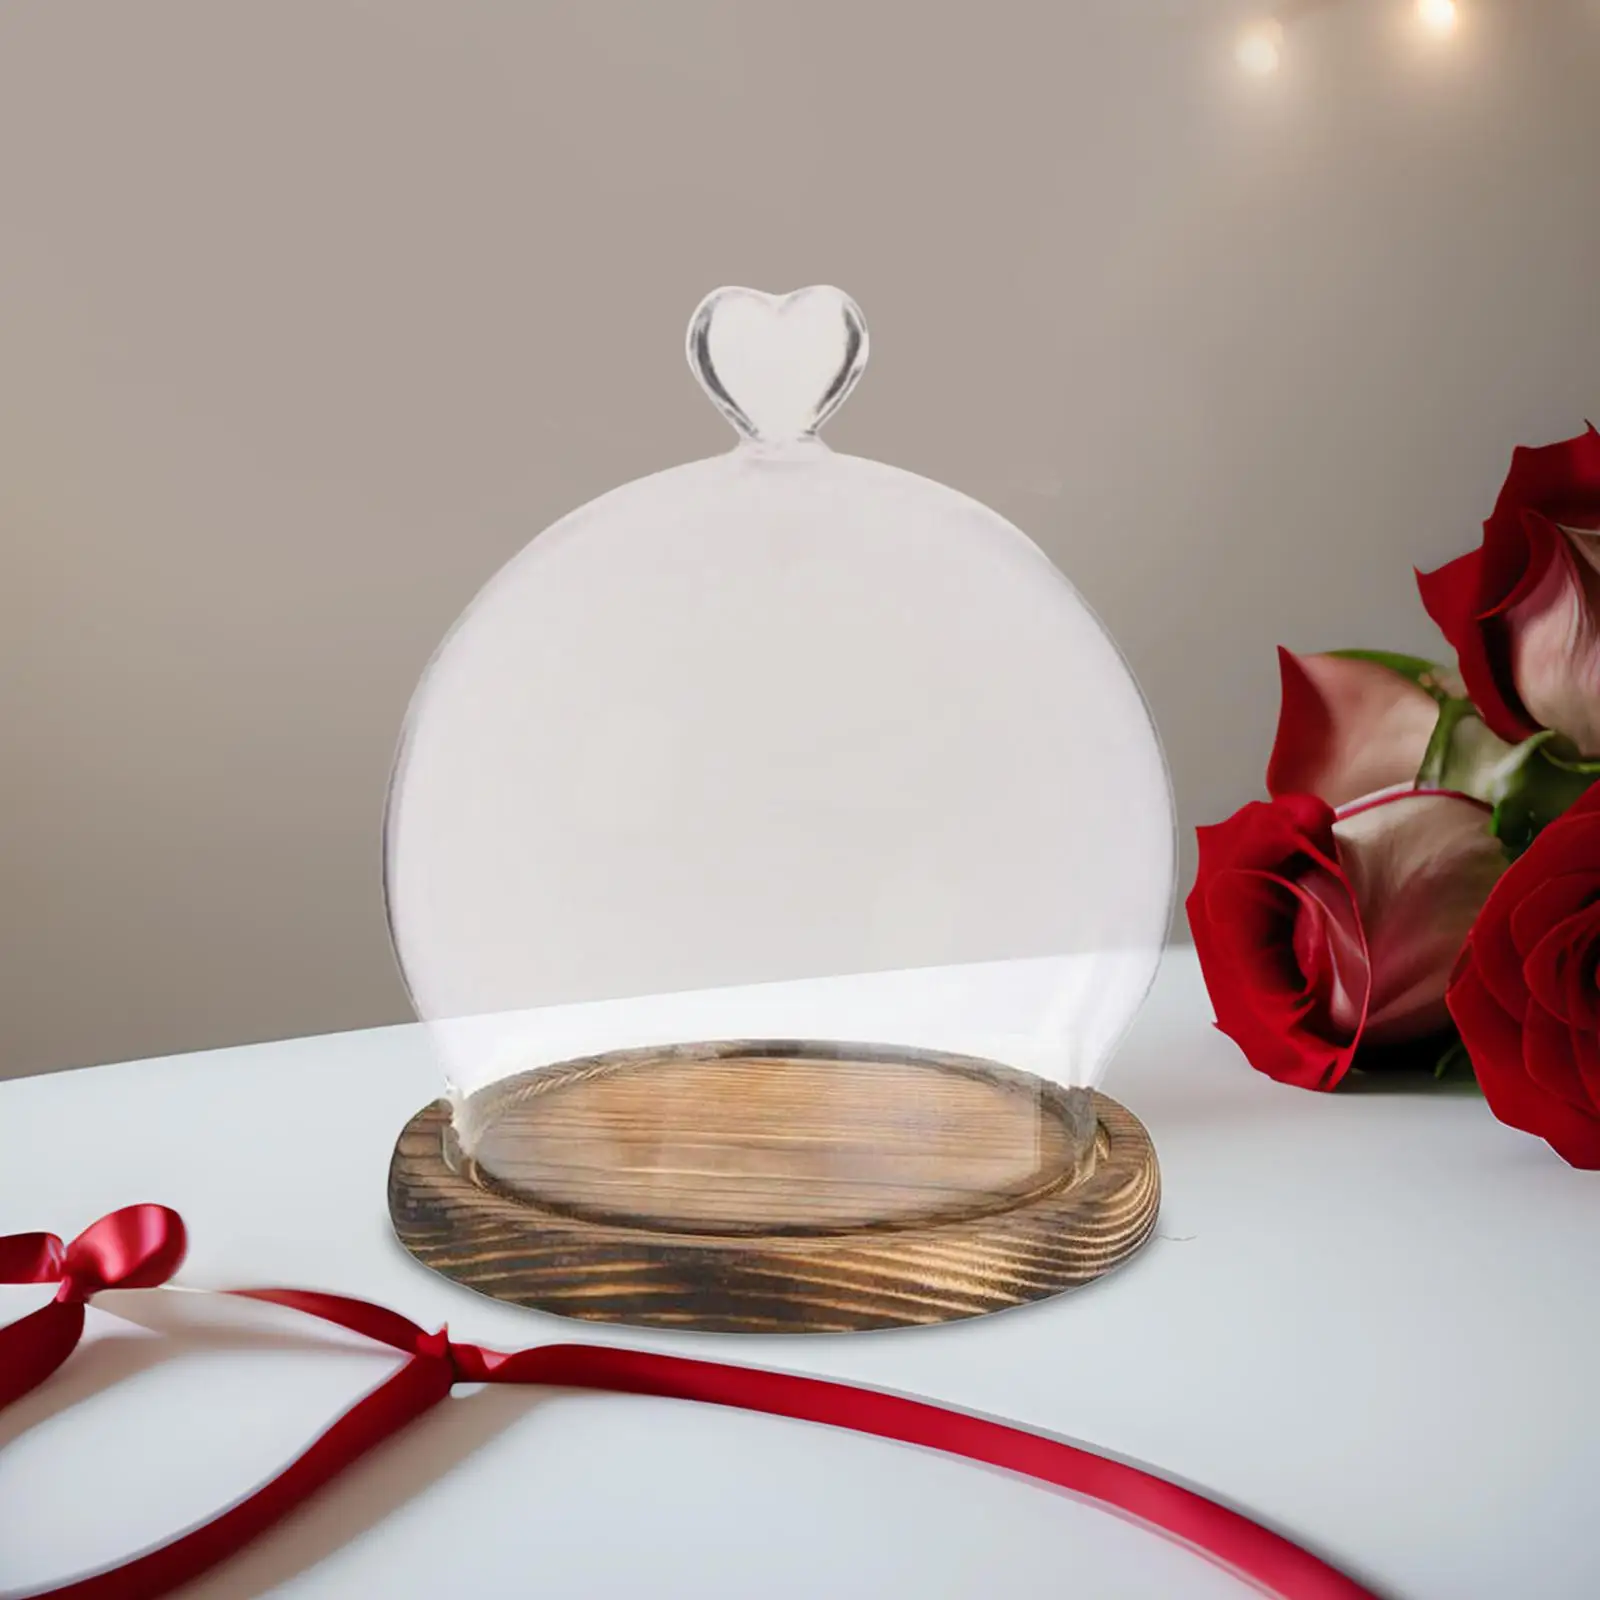 Display Dome with Wooden Base DIY Valentines Day Decor Clear Stand Protective Anniversary Gifts Jar Home Decoration Glass Cloche